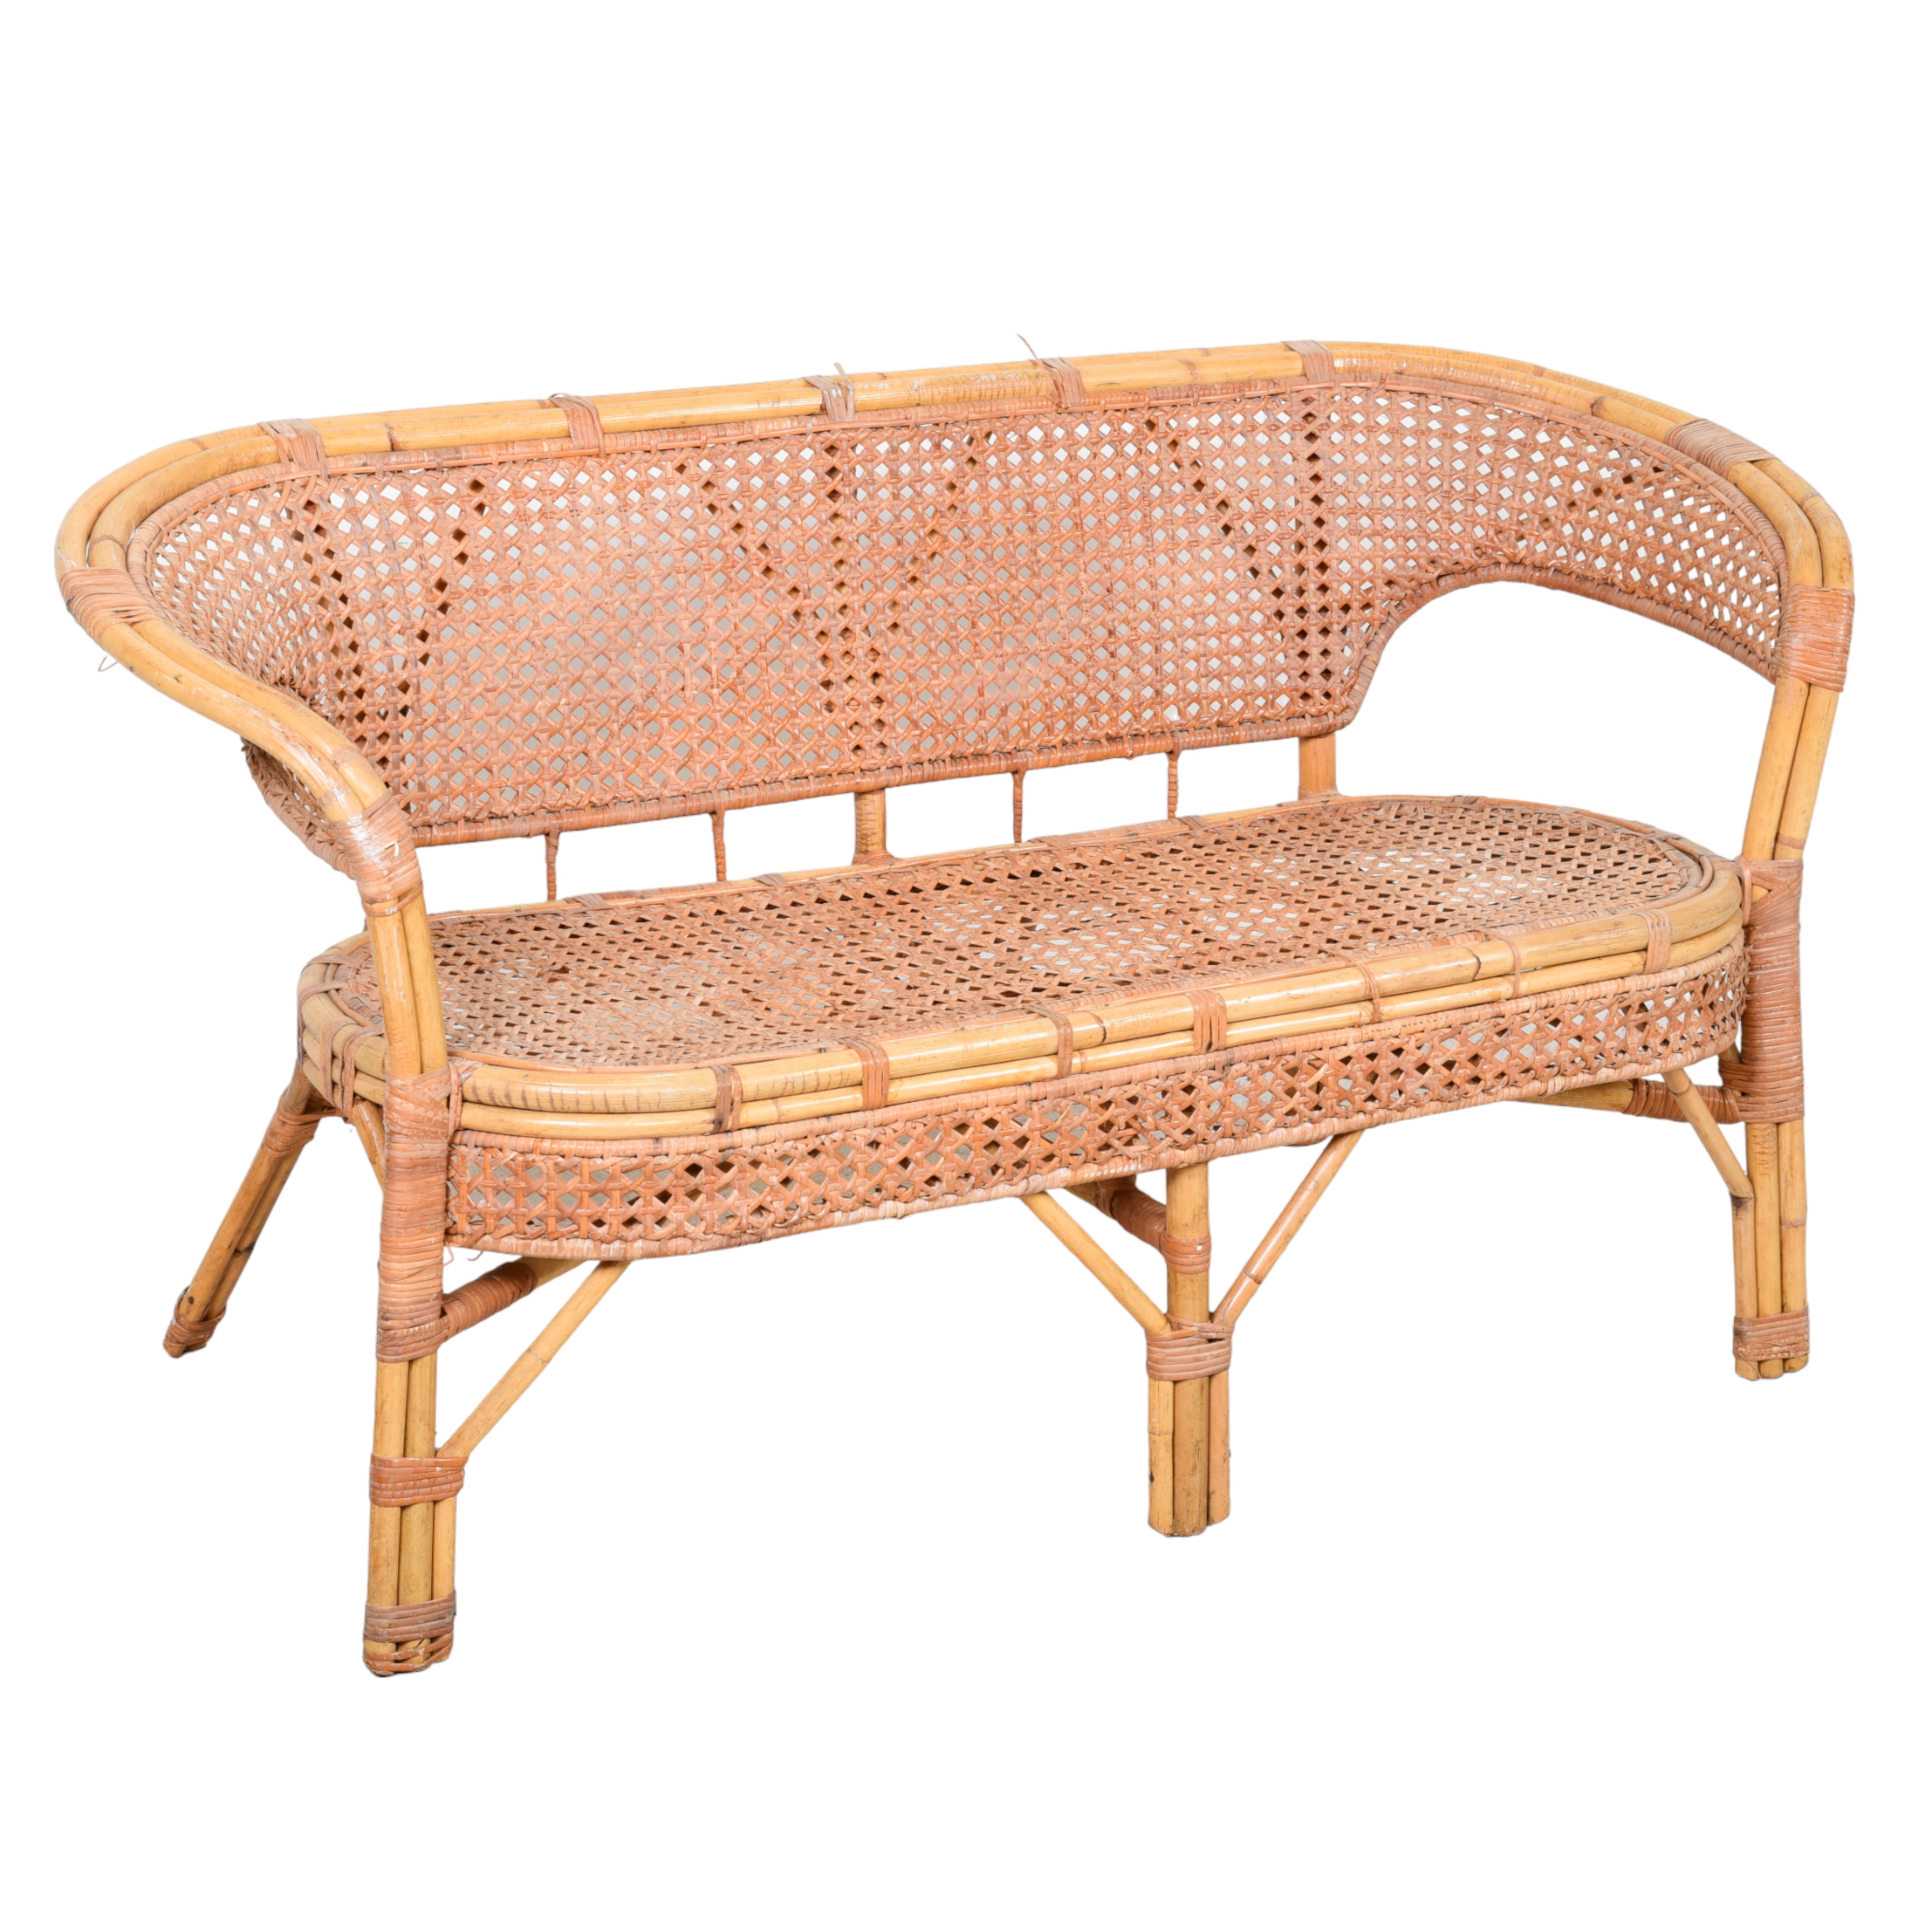 Bamboo and caned bench, caned back